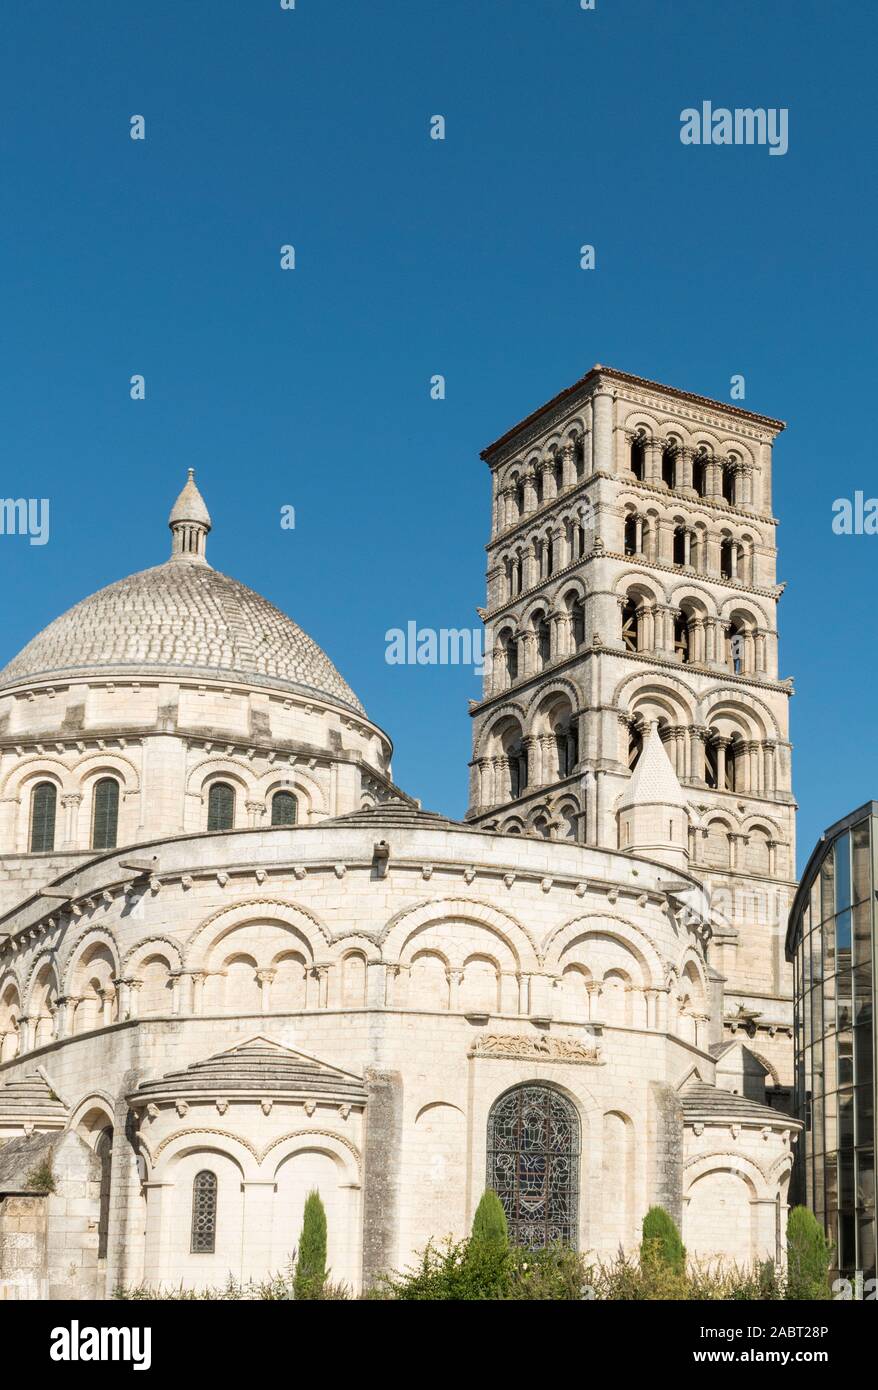 The 12th century Romanesque Cathedral in Angouleme, France Stock Photo